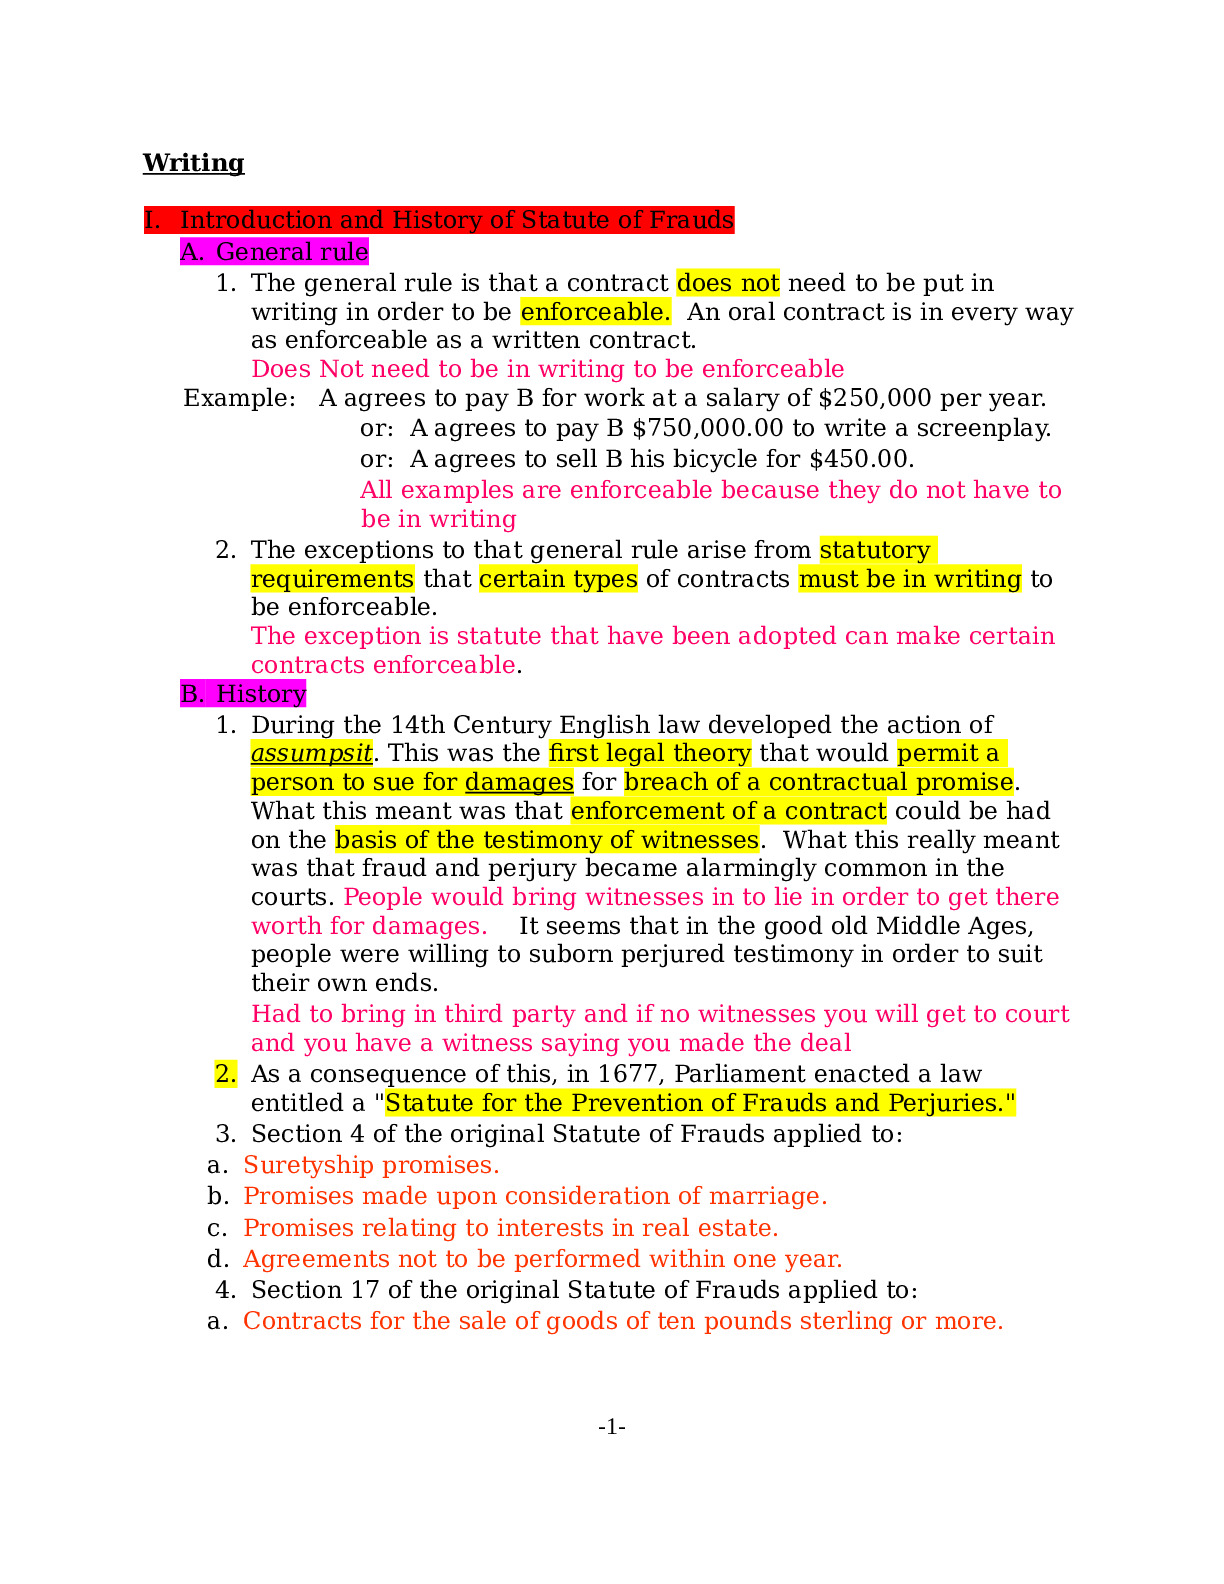 254_Final_Exam_Lecture_Notes.docx